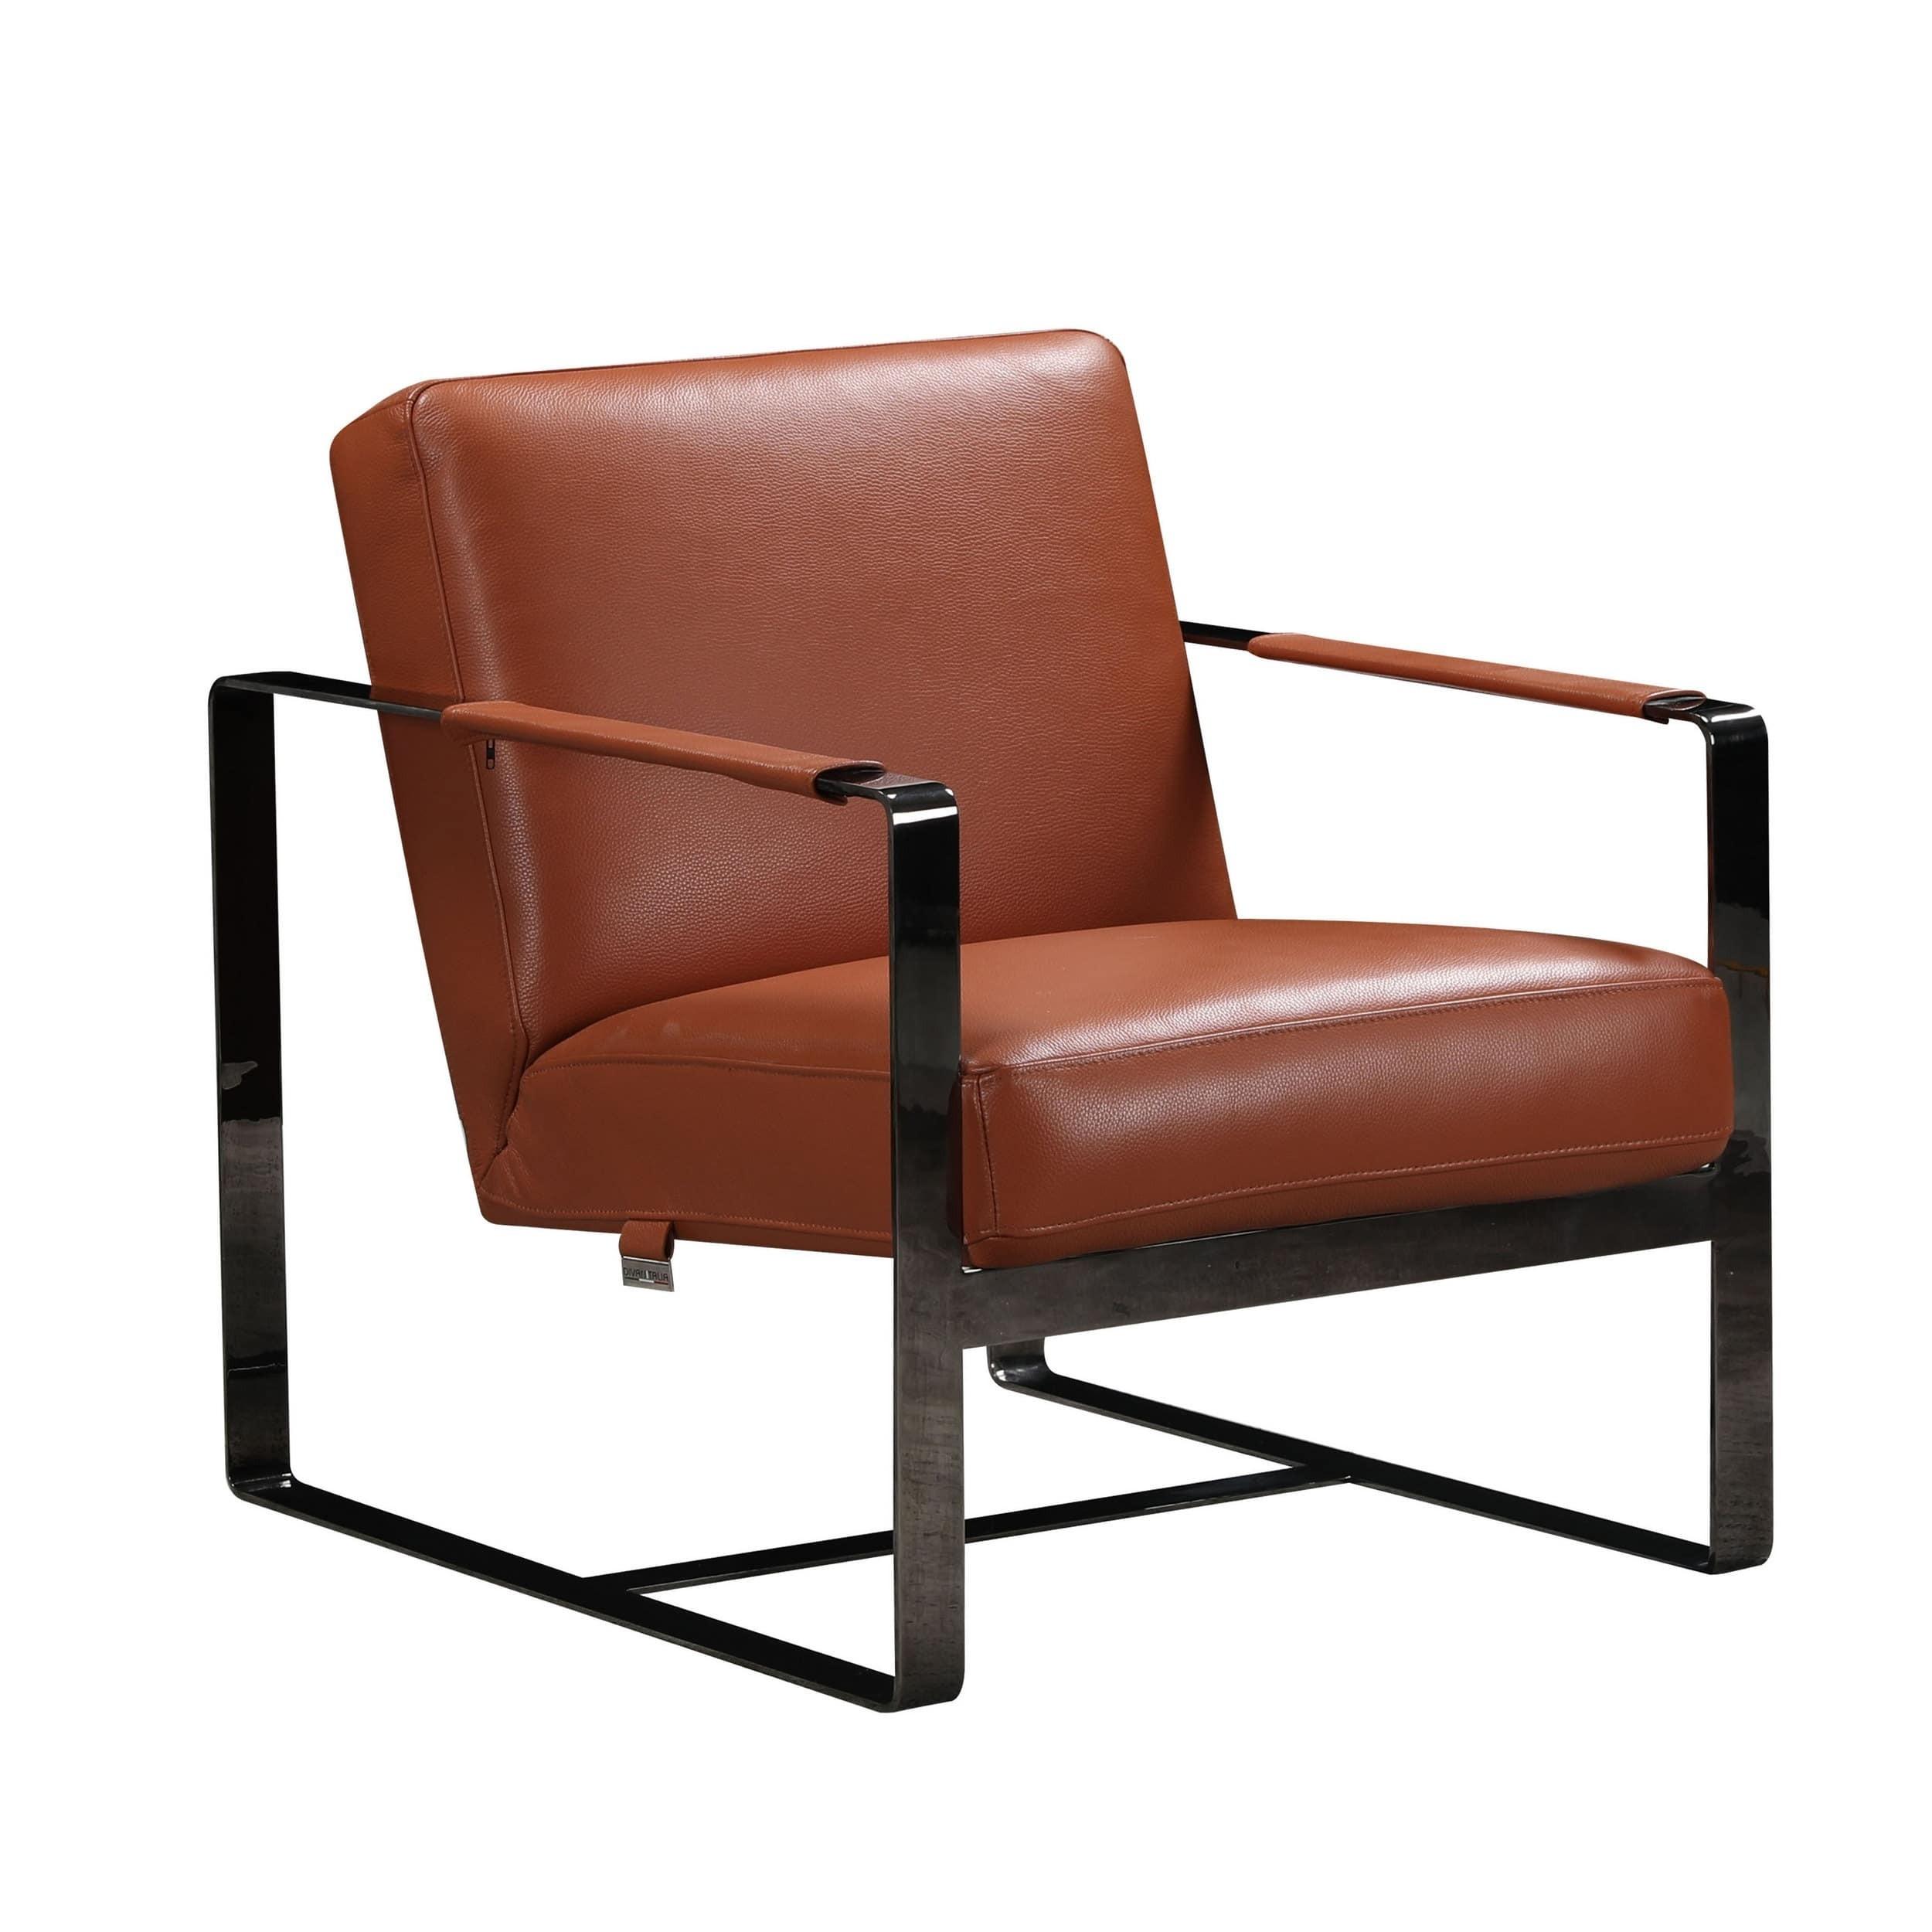 Contemporary Oversized Chair C67 C67-CAMEL-CH in Camel Leather